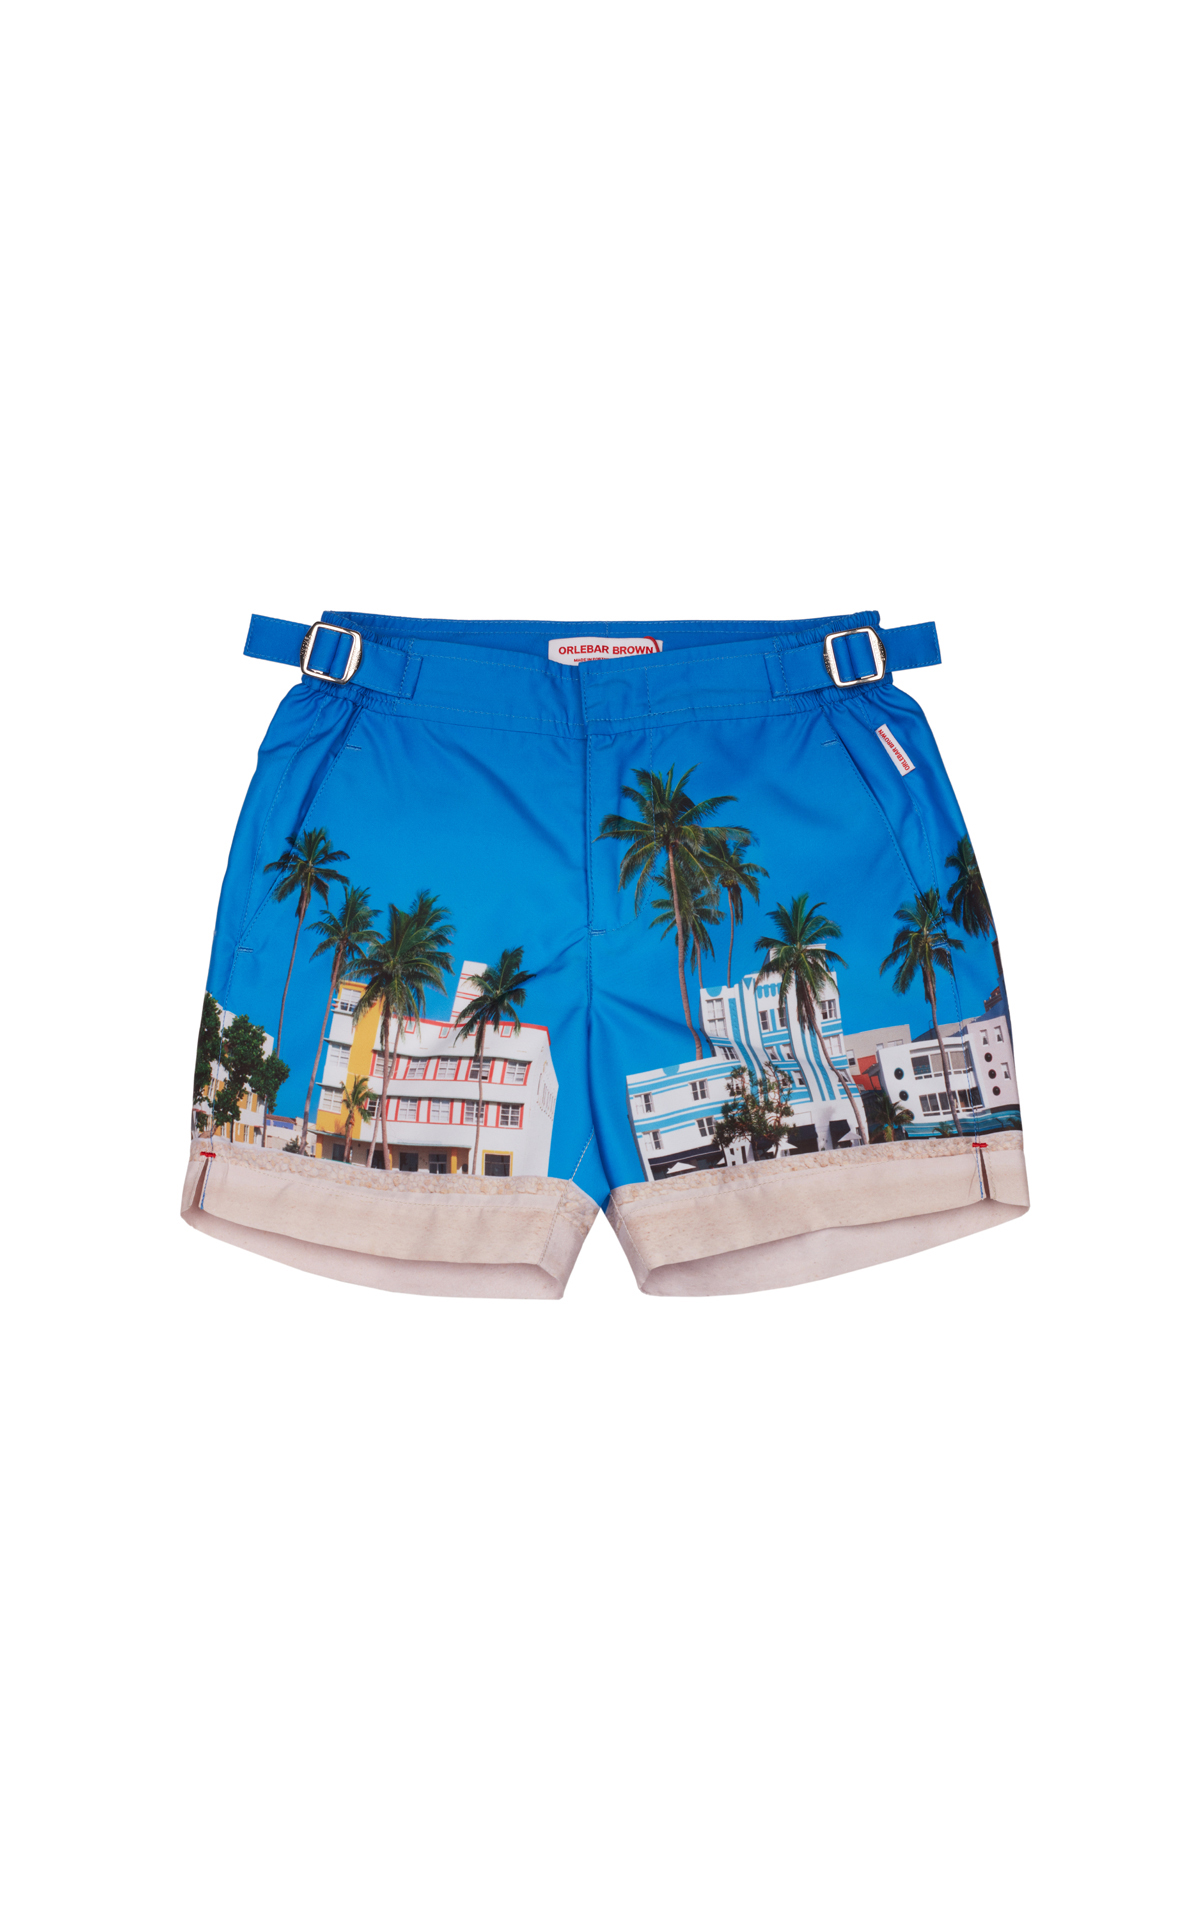 Orlebar Brown Boy's russell photographic swim shorts from Bicester Village